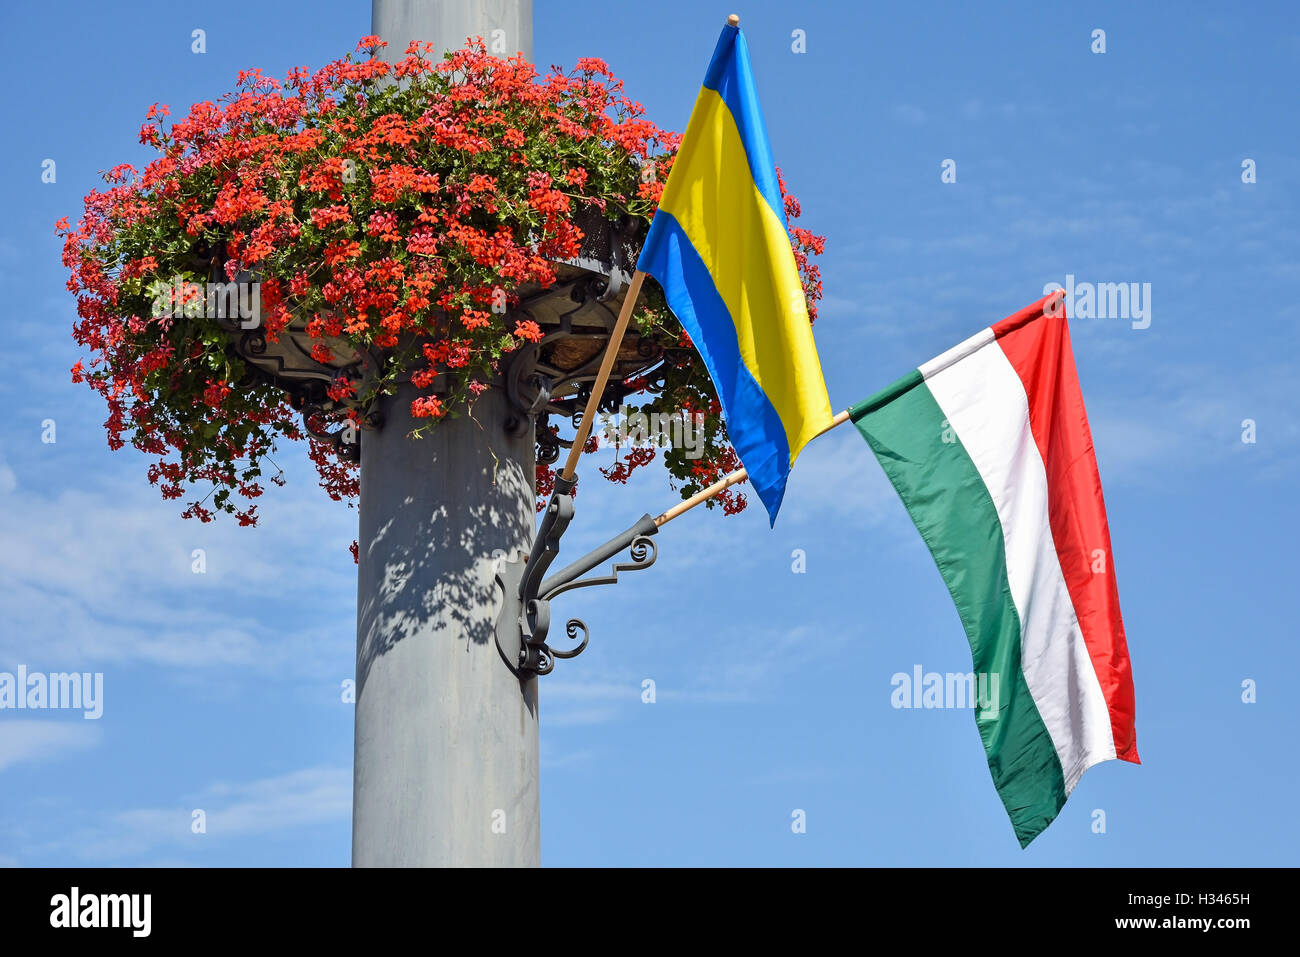 Hungarian flag and flowers on a pole Stock Photo